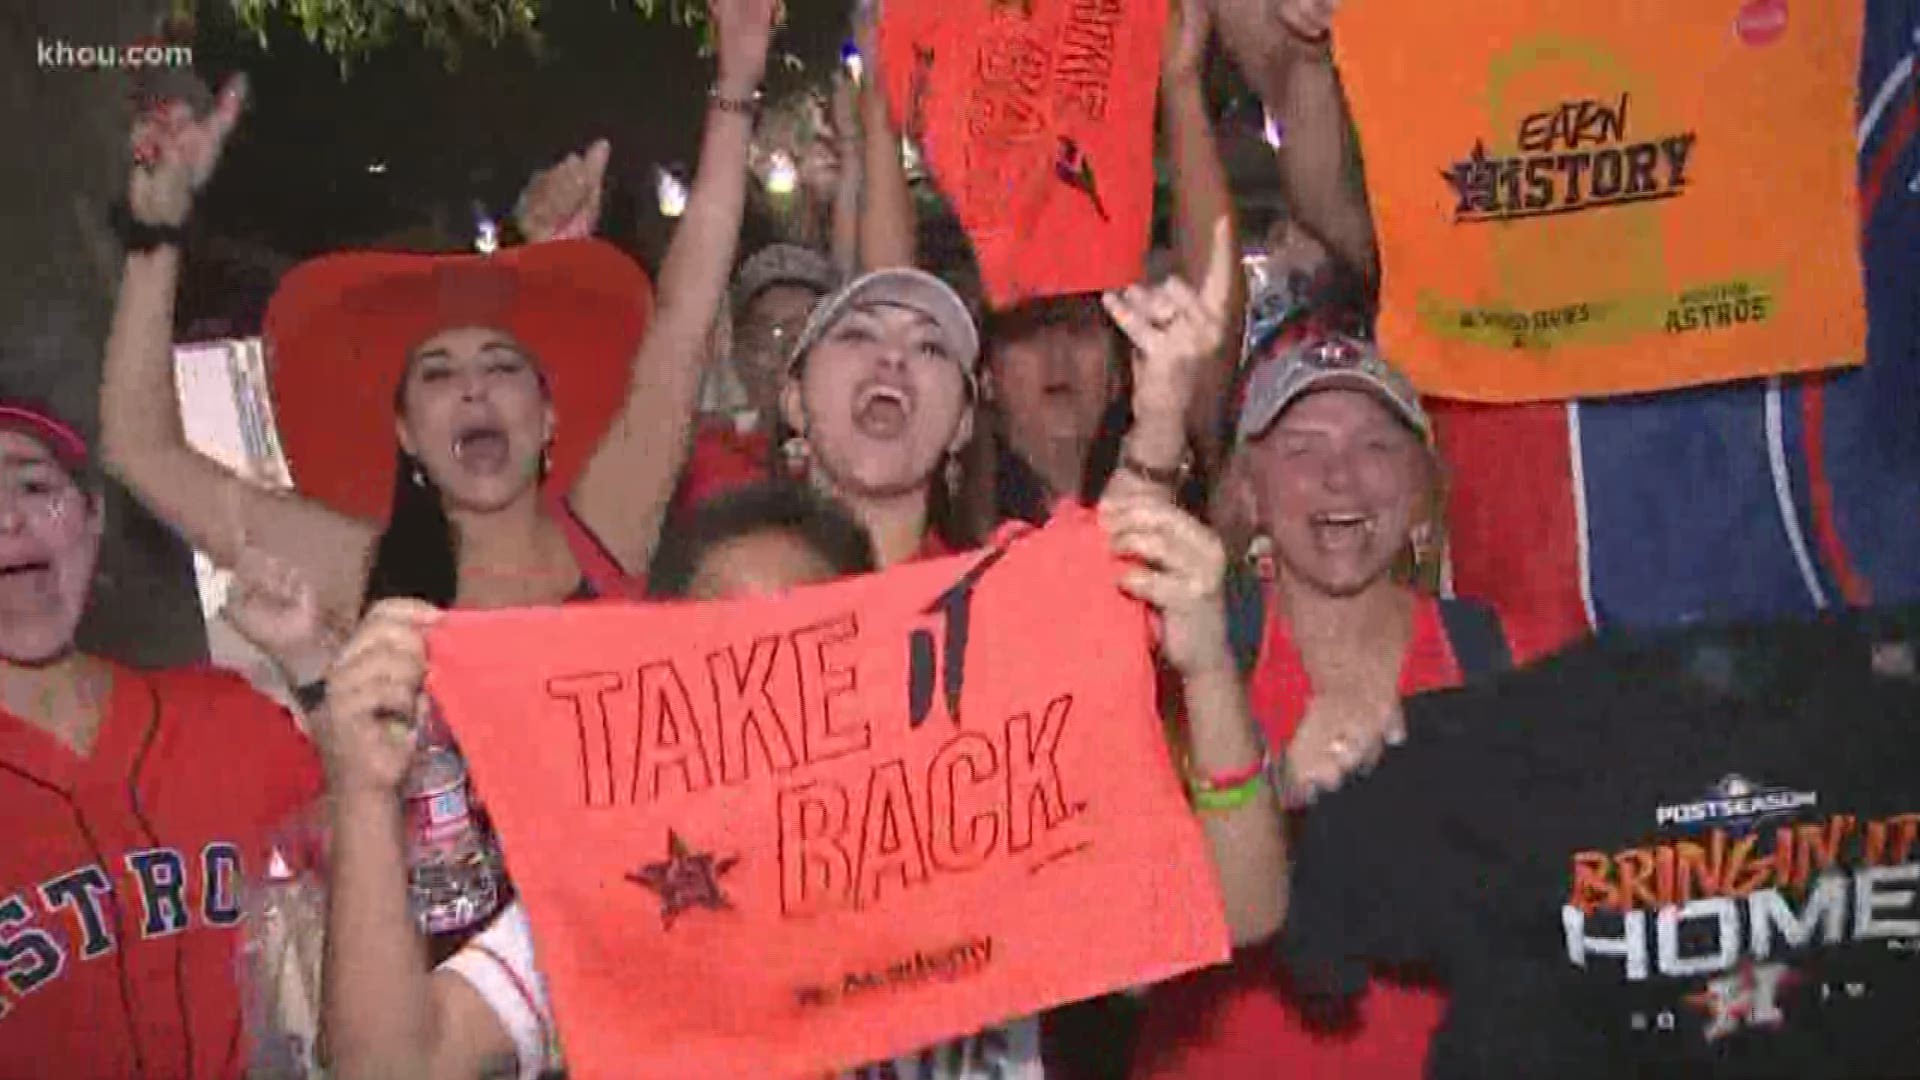 Houston Astros fans were pumped after the team's Game 5 win over the Tampa Bay Rays Thursday night. Houston advances to the ALCS against the Yankees.